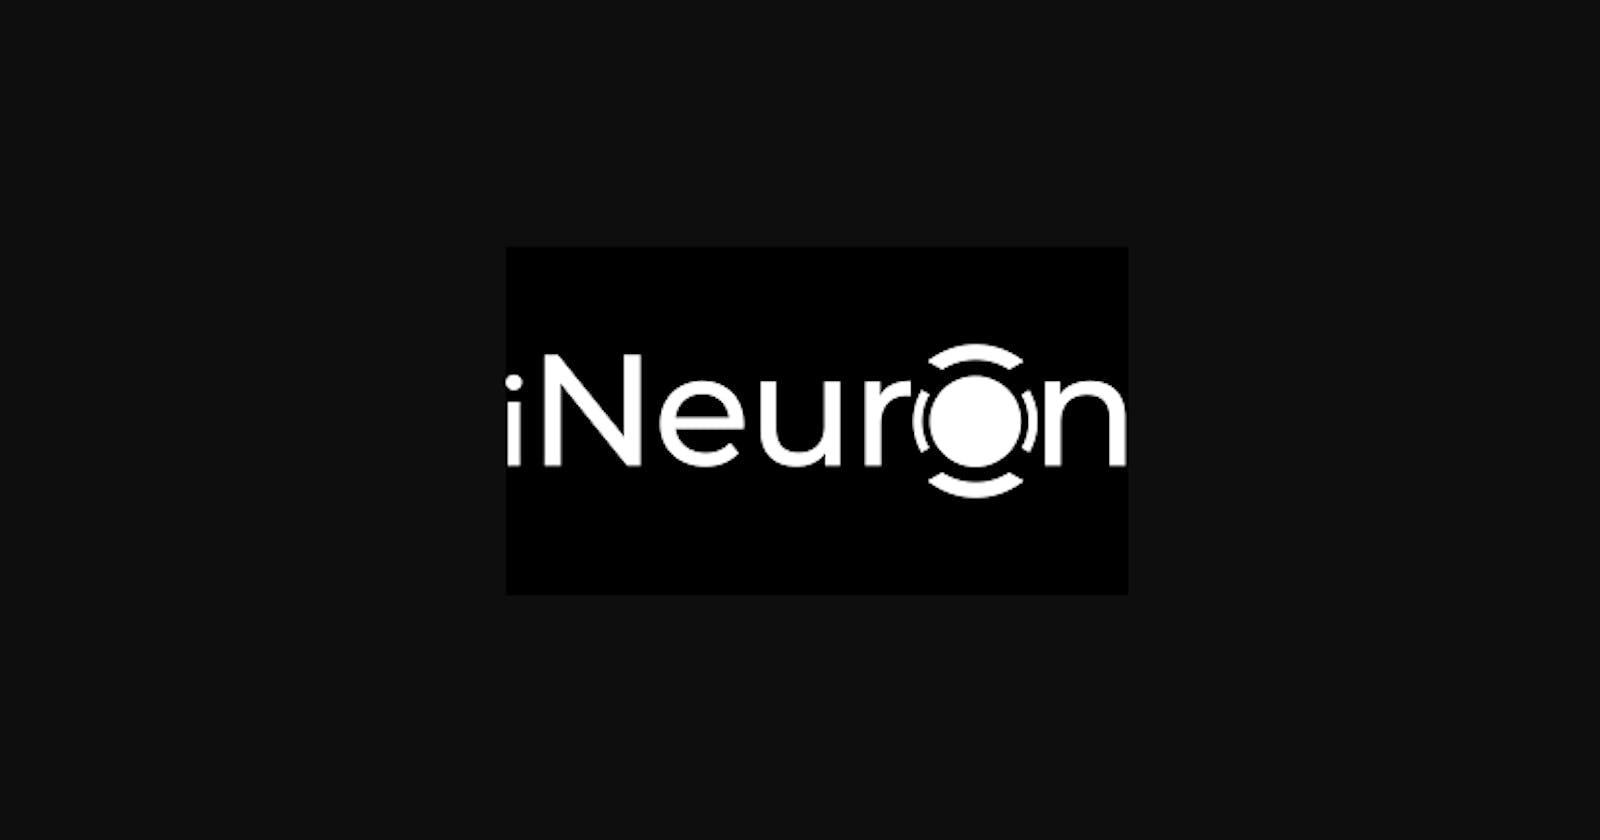 My Journey With iNeuron